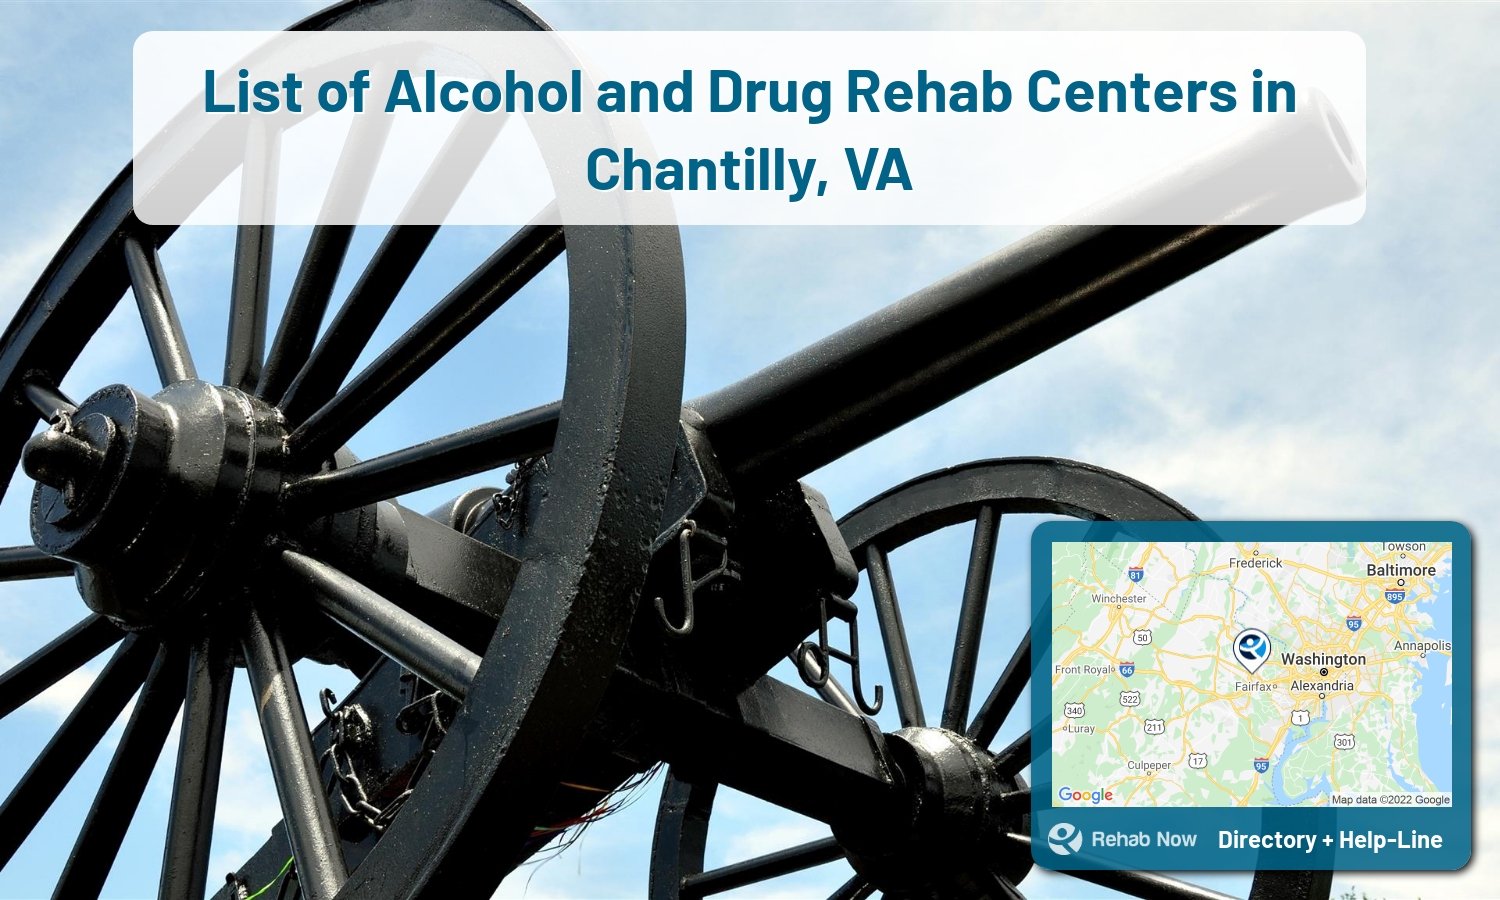 Easily find the top Rehab Centers in Chantilly, VA. We researched hard to pick the best alcohol and drug rehab centers in Virginia.